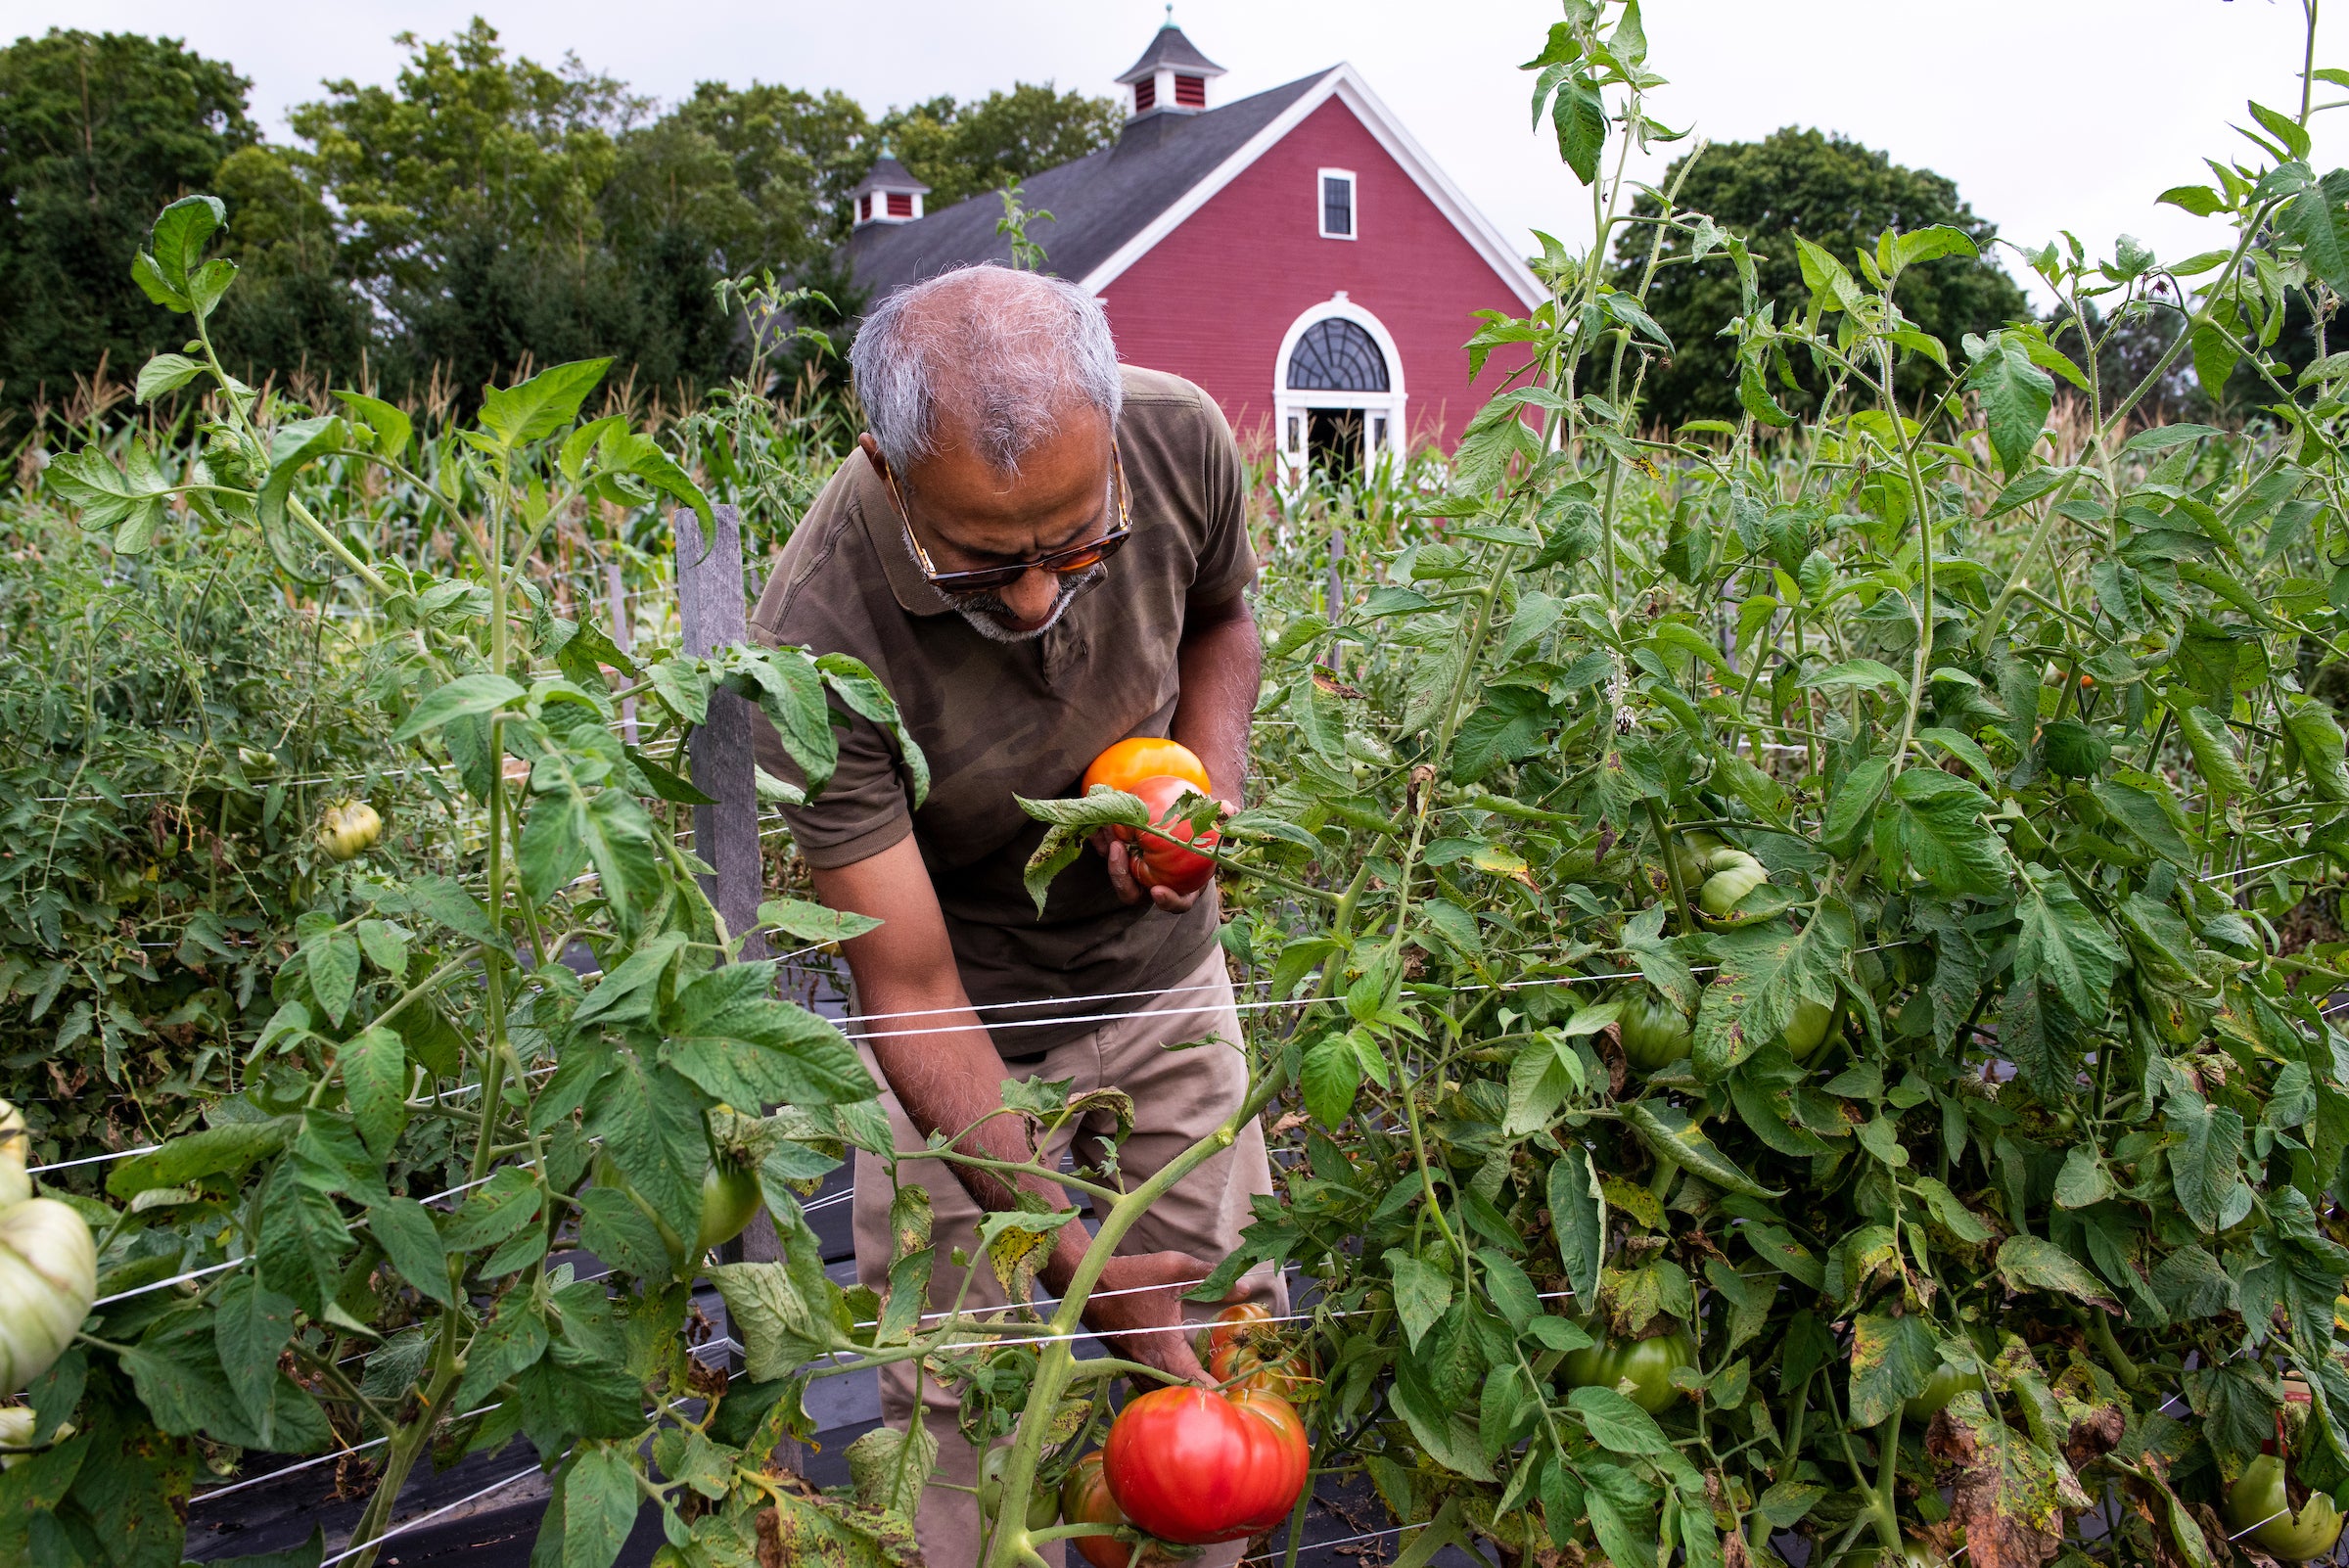 Mohammad Hannan tends to his crops for his small business, Hannan Agro Farms, at the New Entry Farm. (Alonso Nichols/Tufts)